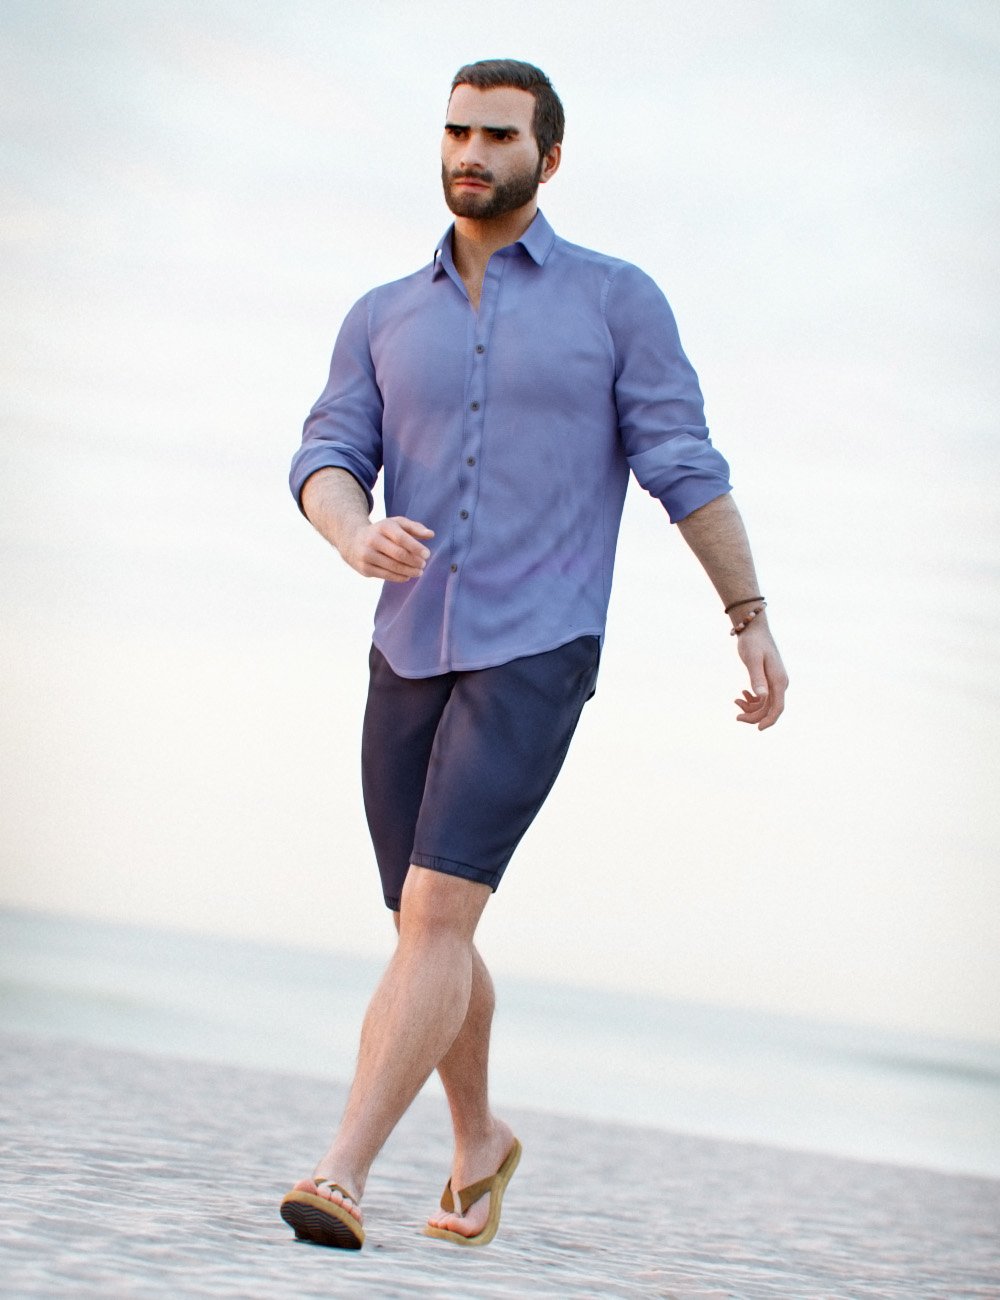 dForce MI Summer Casual Outfit for Genesis 8 and 8.1 Males by: mal3Imagery, 3D Models by Daz 3D